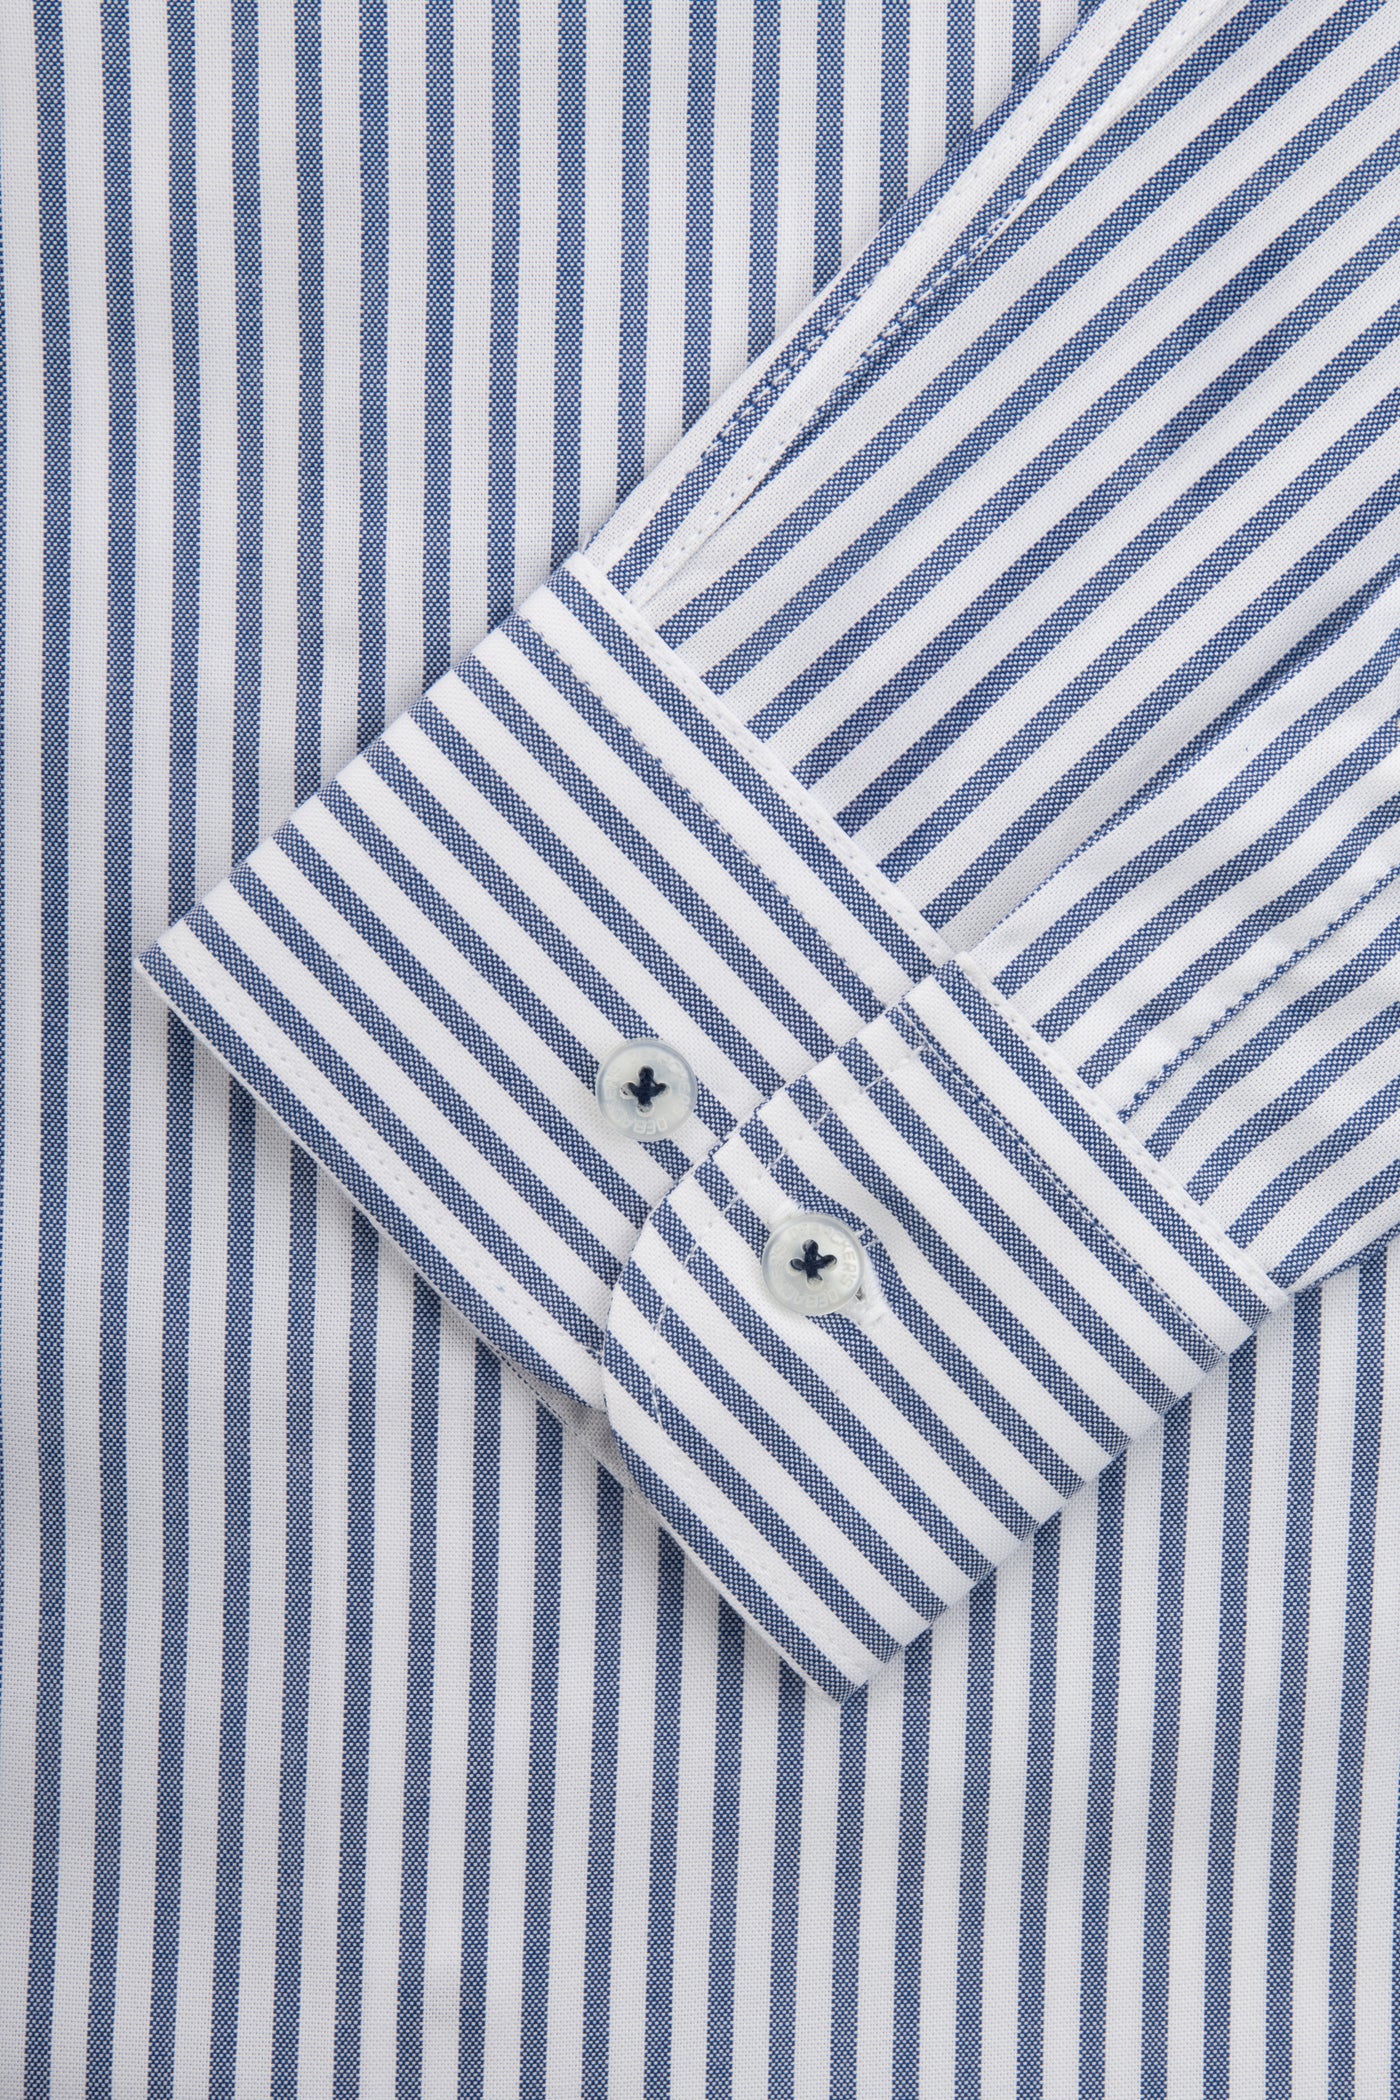 Striped White & Navy Smart Casual Shirt